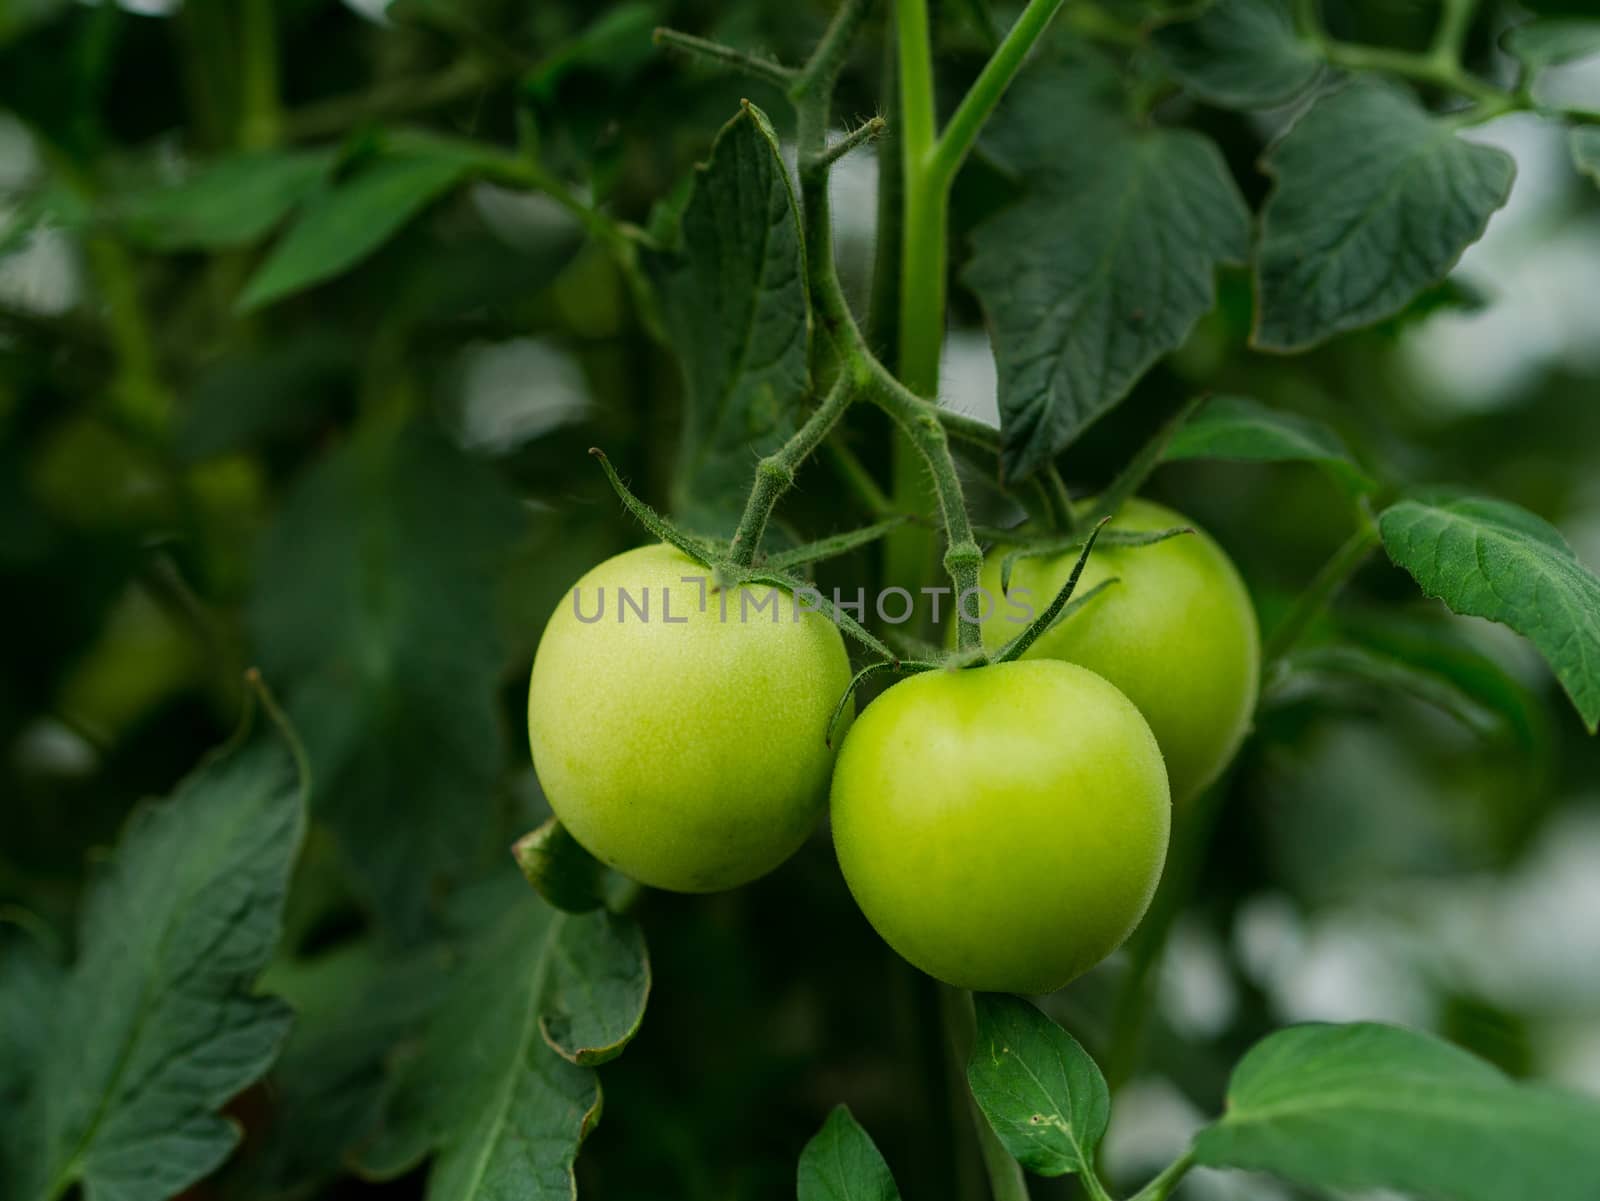 Tomatoes by Alex_L